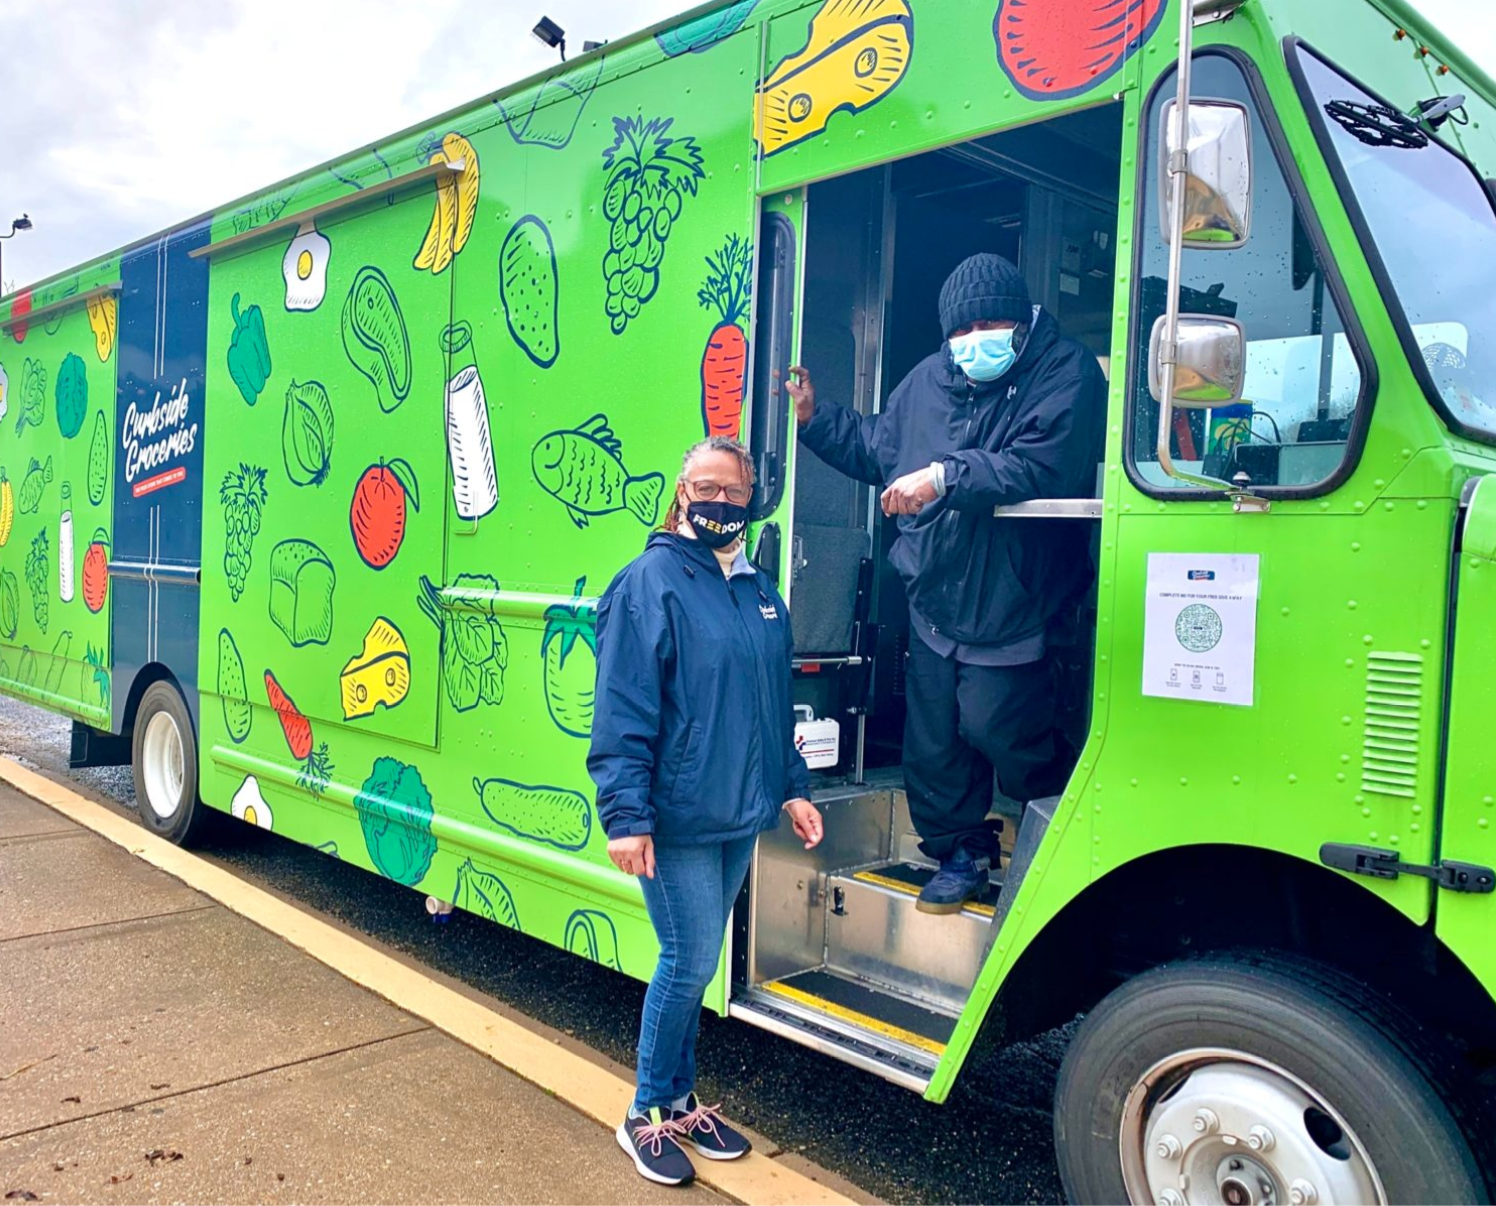 Photo displays two workers outside of a bright green food ruck with cartoon vegetables on the truck